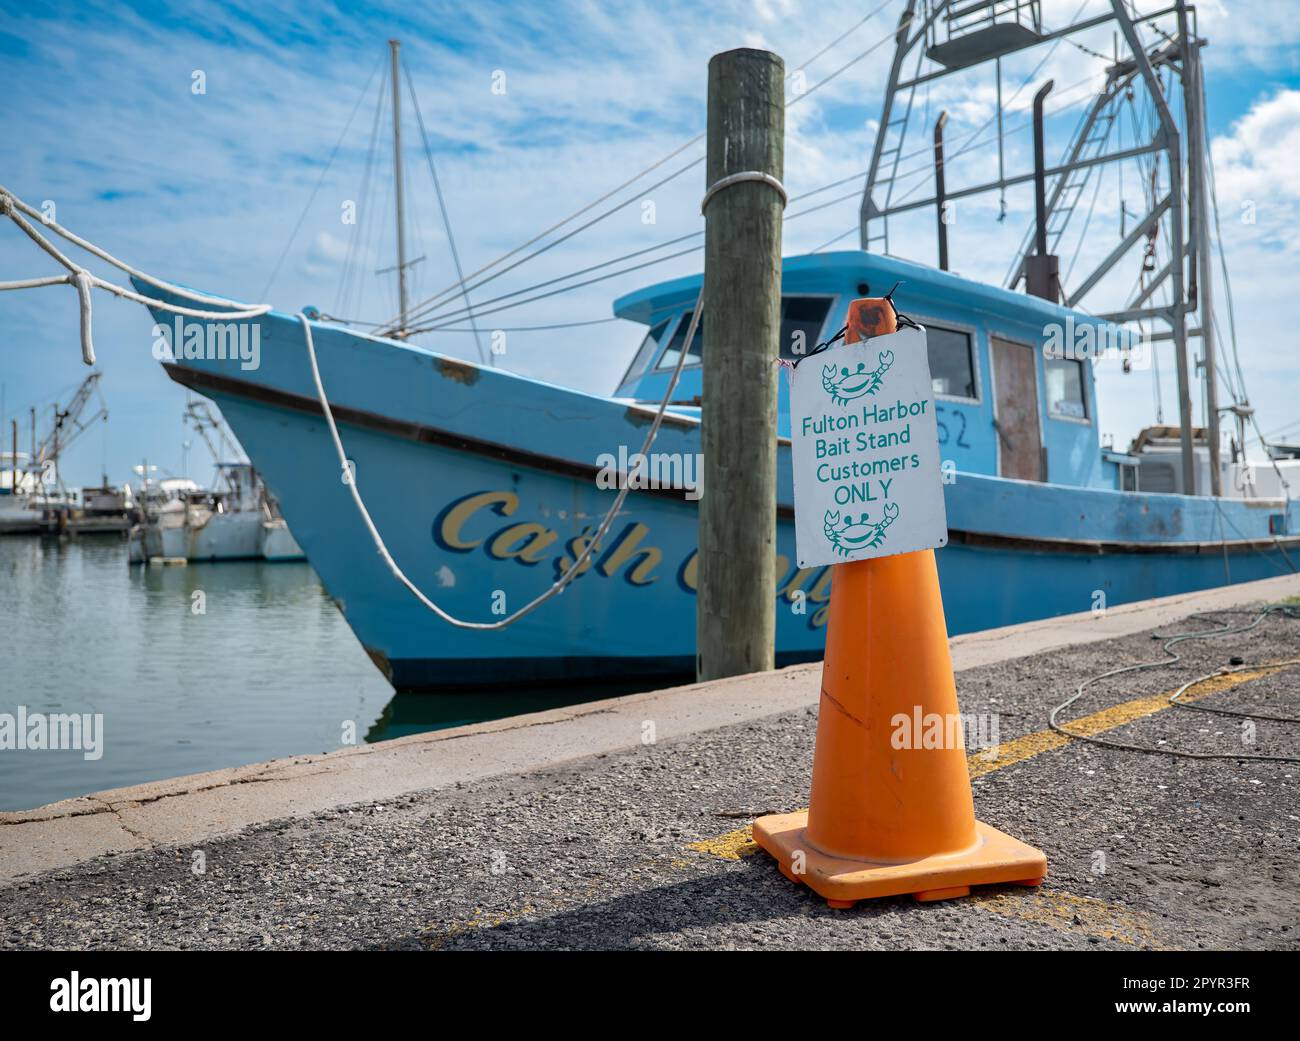 FULTON, TX - 14 FEB 2023: Parking Sign on an orange traffic warning cone, near a blue commercial fishing boat, moored by ropes to a wood piling in the Stock Photo